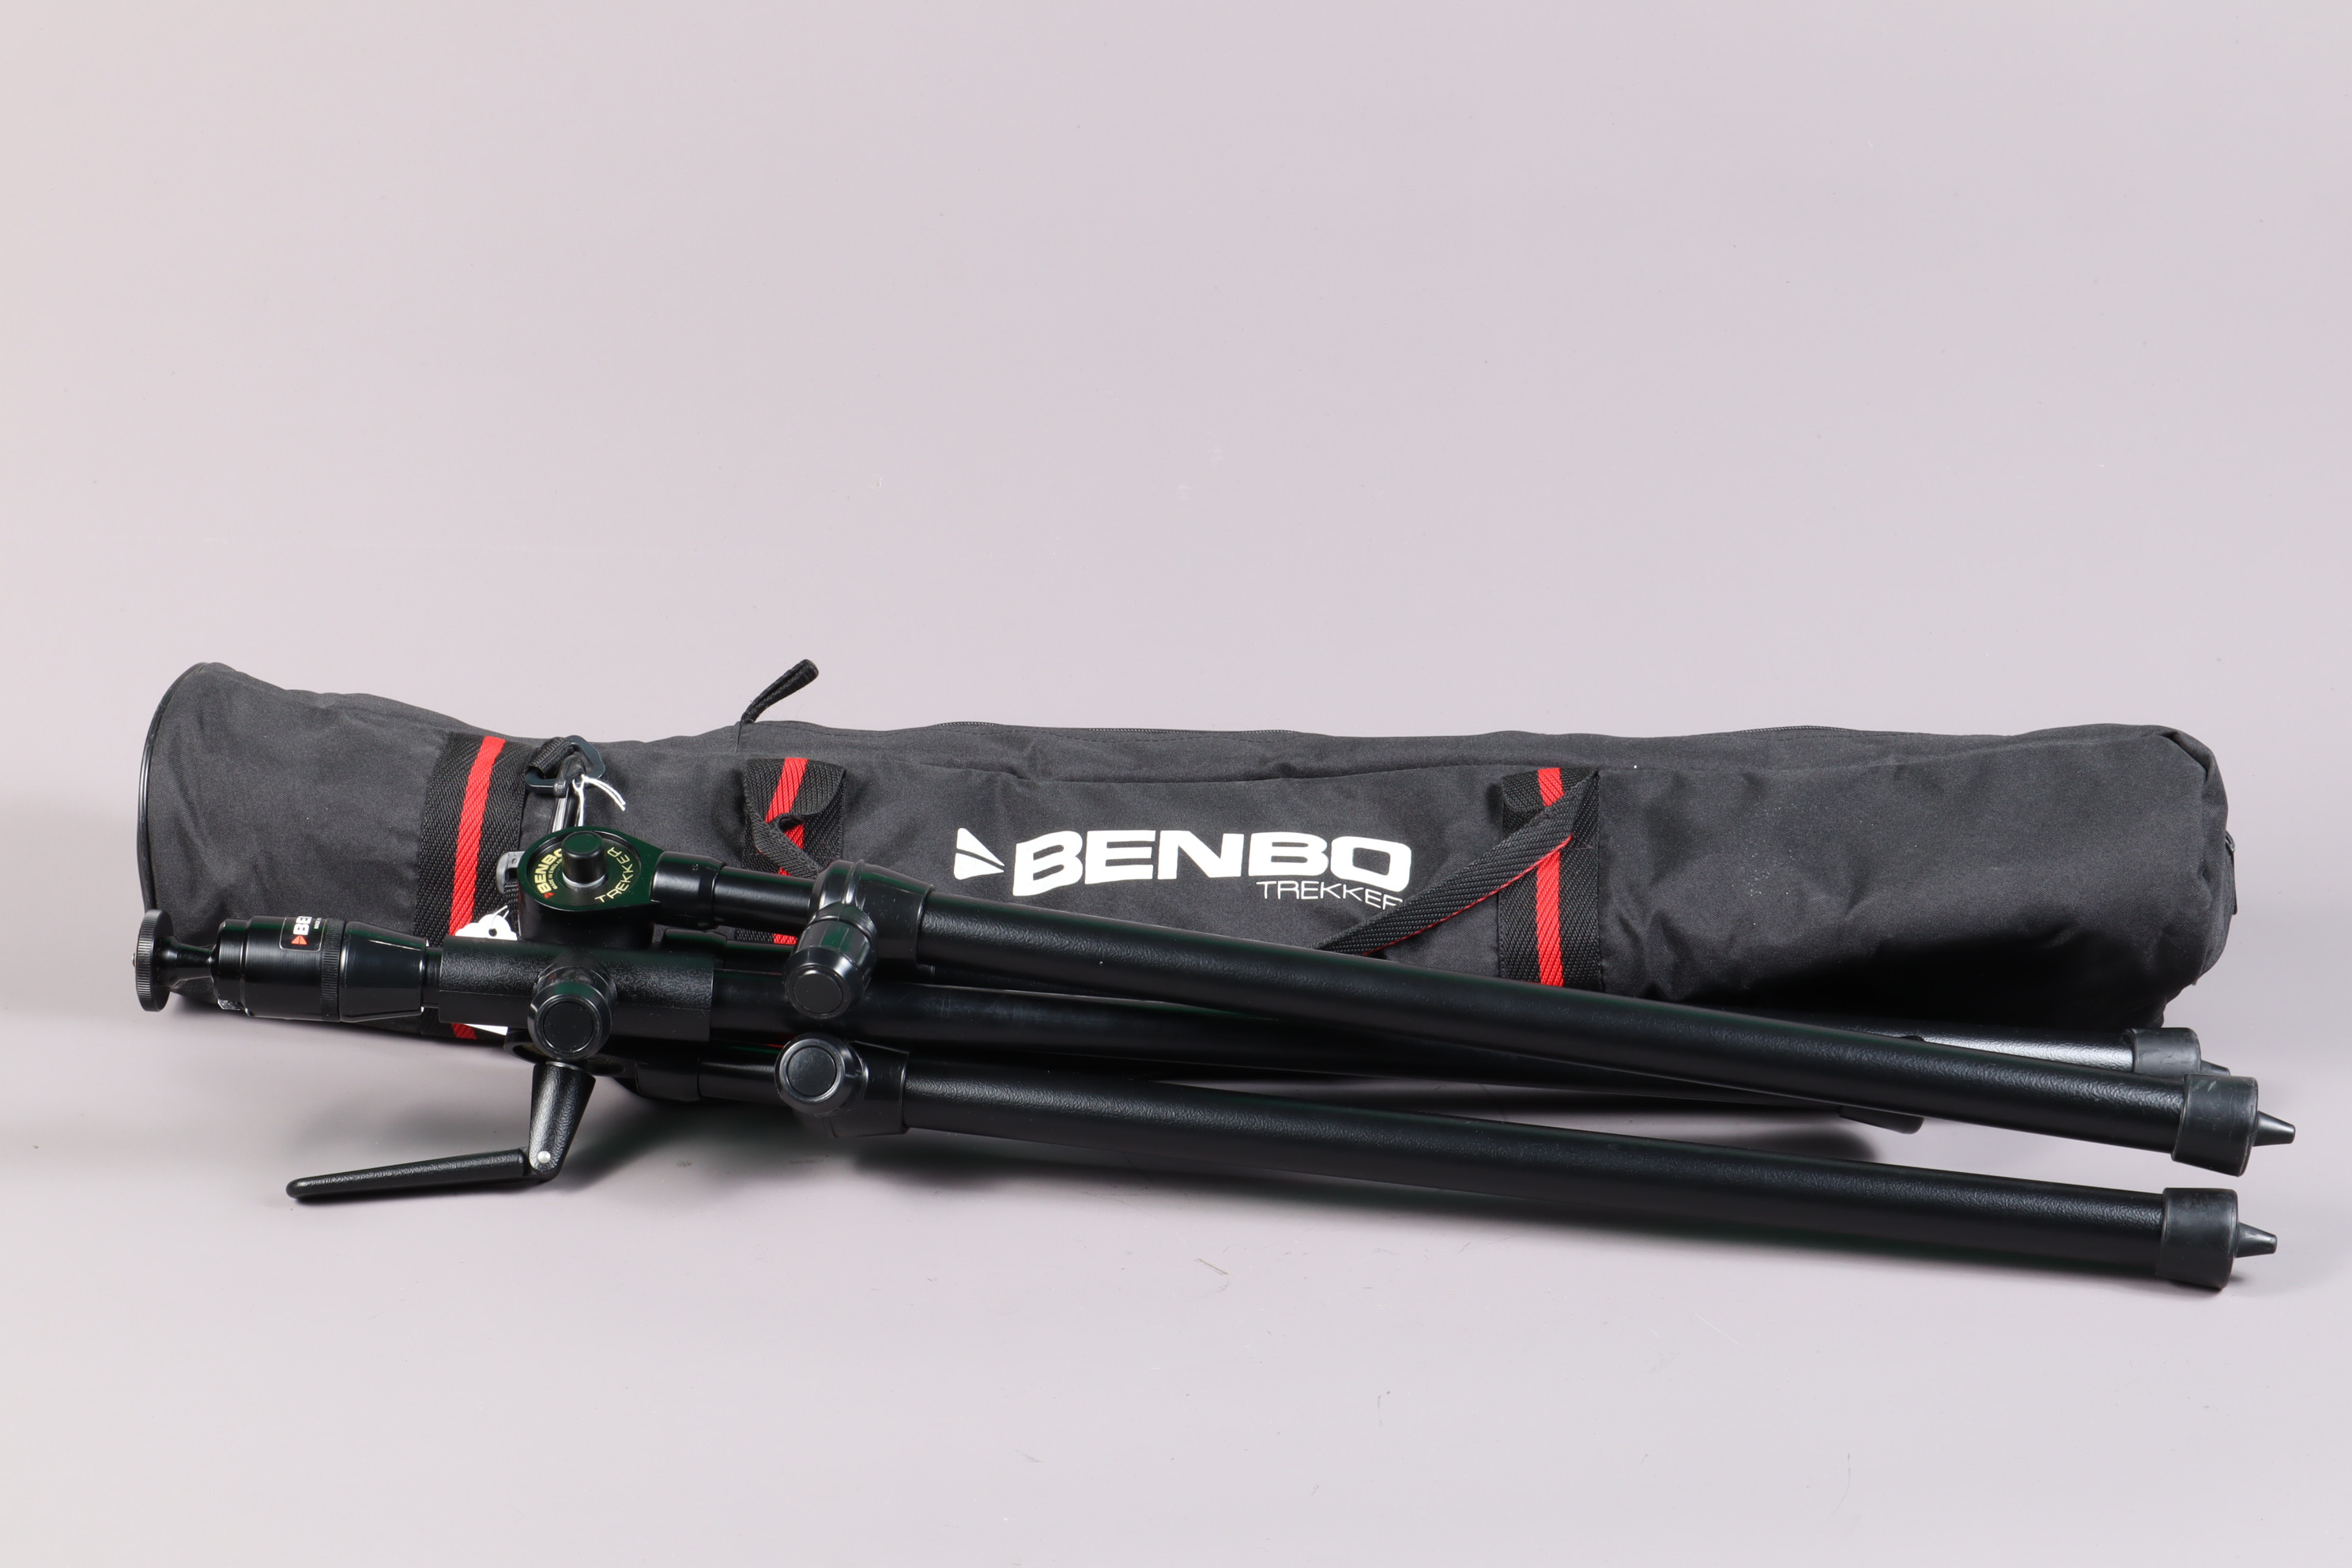 Two Tripods, comprising a Benbo Trekker tripod with Benbo ball head, a maker's soft case and a